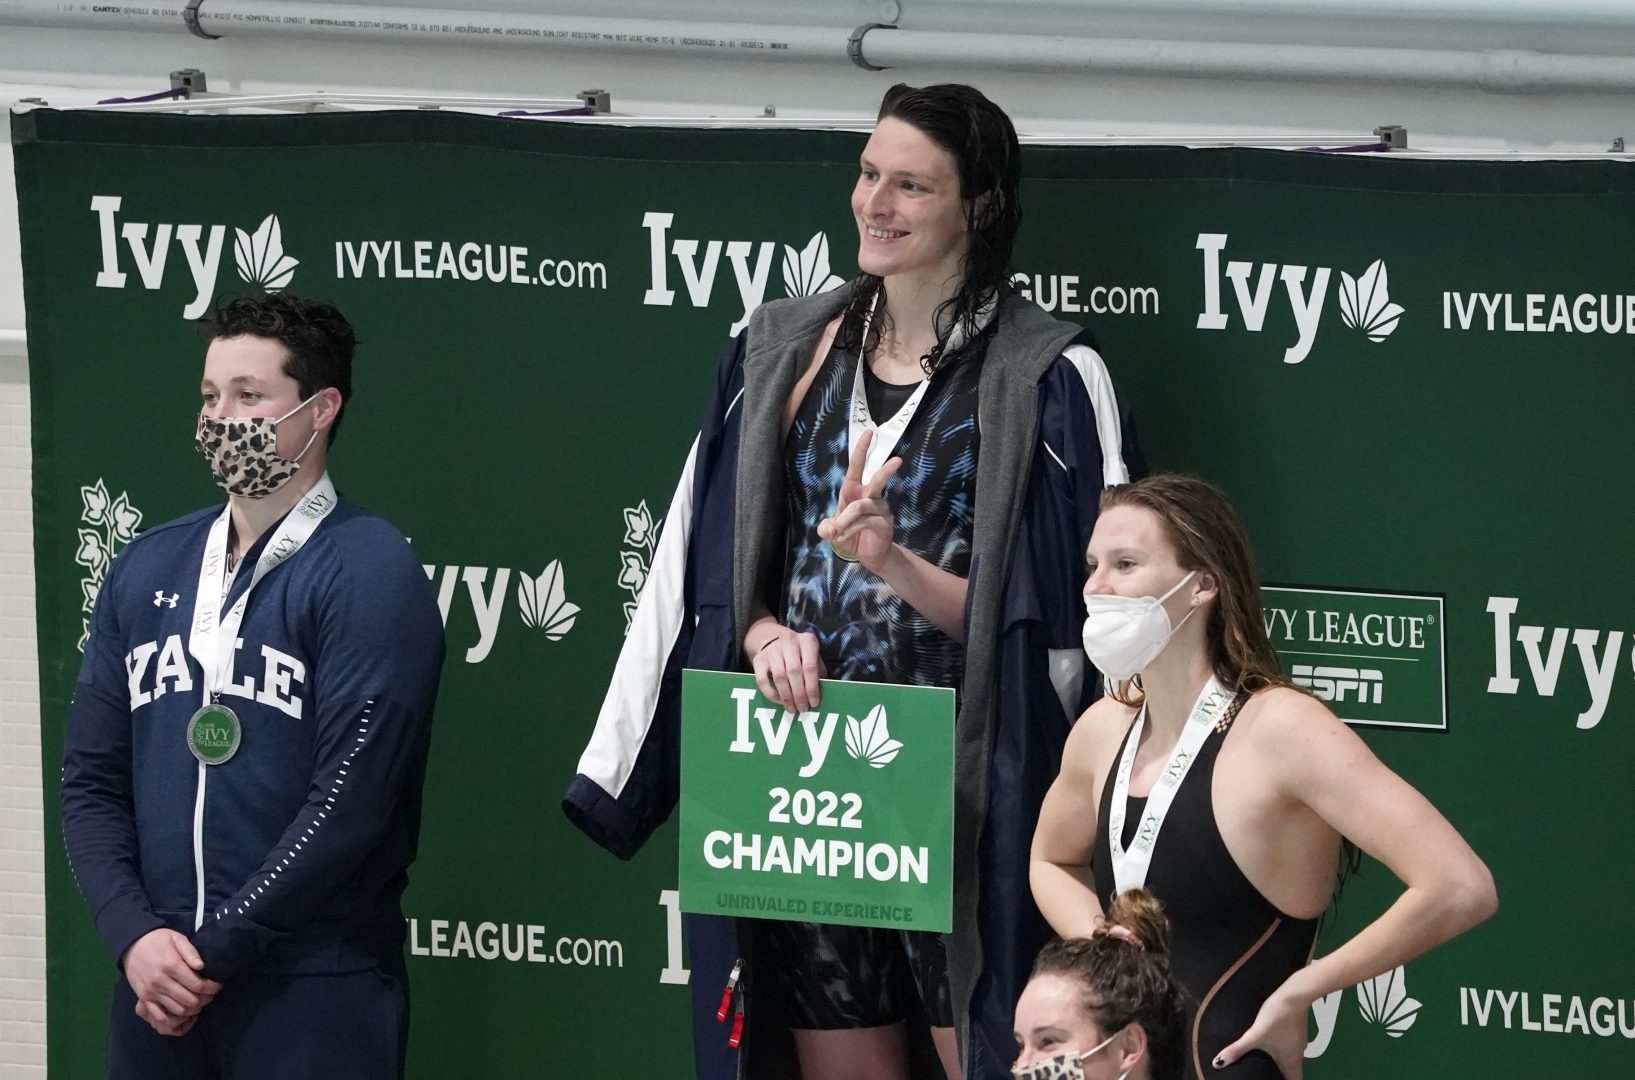 Pennsylvania's Lia Thomas, center, Yale's Iszak Henig, left, and Princeton's Nikki Venema stand on the podium following a medal ceremony after Thomas won the 100-yard freestyle, Henig finished second and Venema third at the Ivy League women's swimming and diving championships at Harvard, Saturday, Feb. 19, 2022, in Cambridge, Mass. Henig, who is transitioning to male but hasn't begun hormone treatments yet, is swimming for the Yale women's team and Thomas, who is transitioning to female, is swimming for the Penn women's team. (AP Photo/Mary Schwalm)